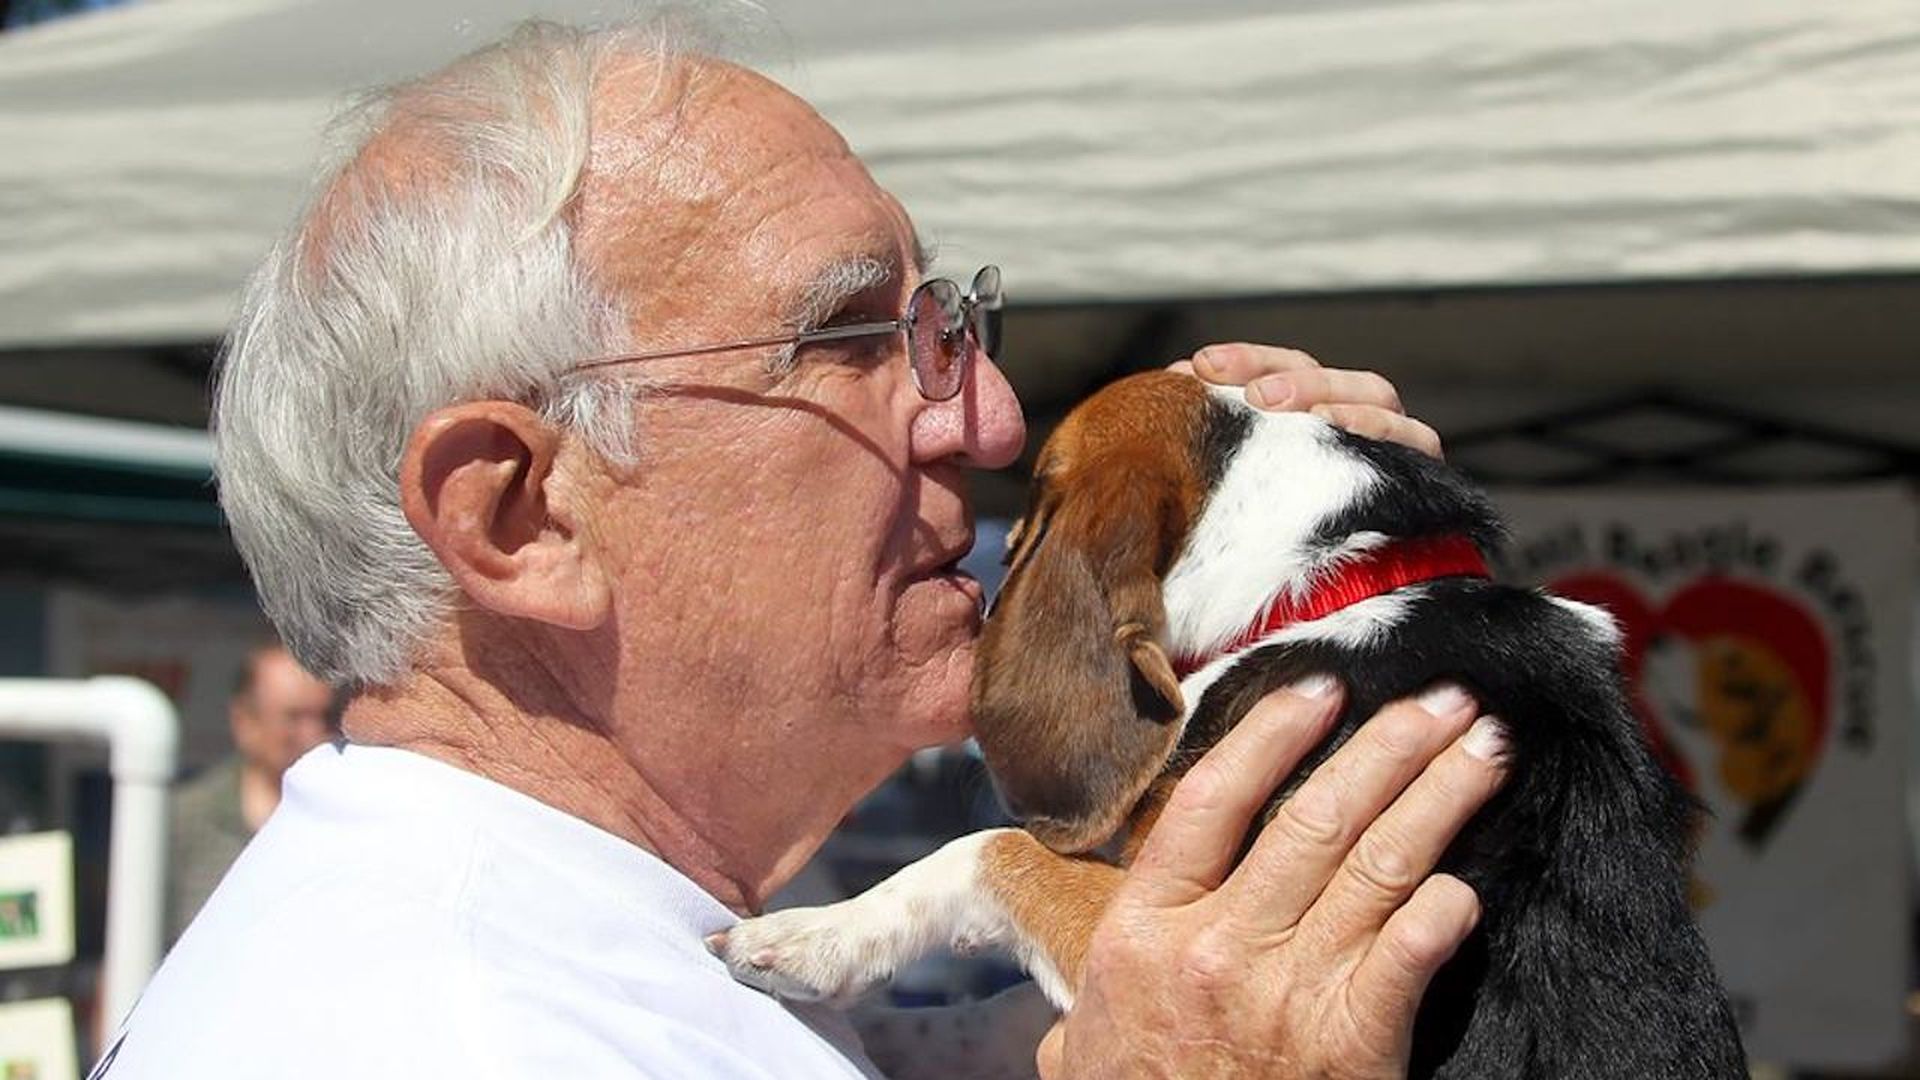 A man holding a beagle and whispering into its ear